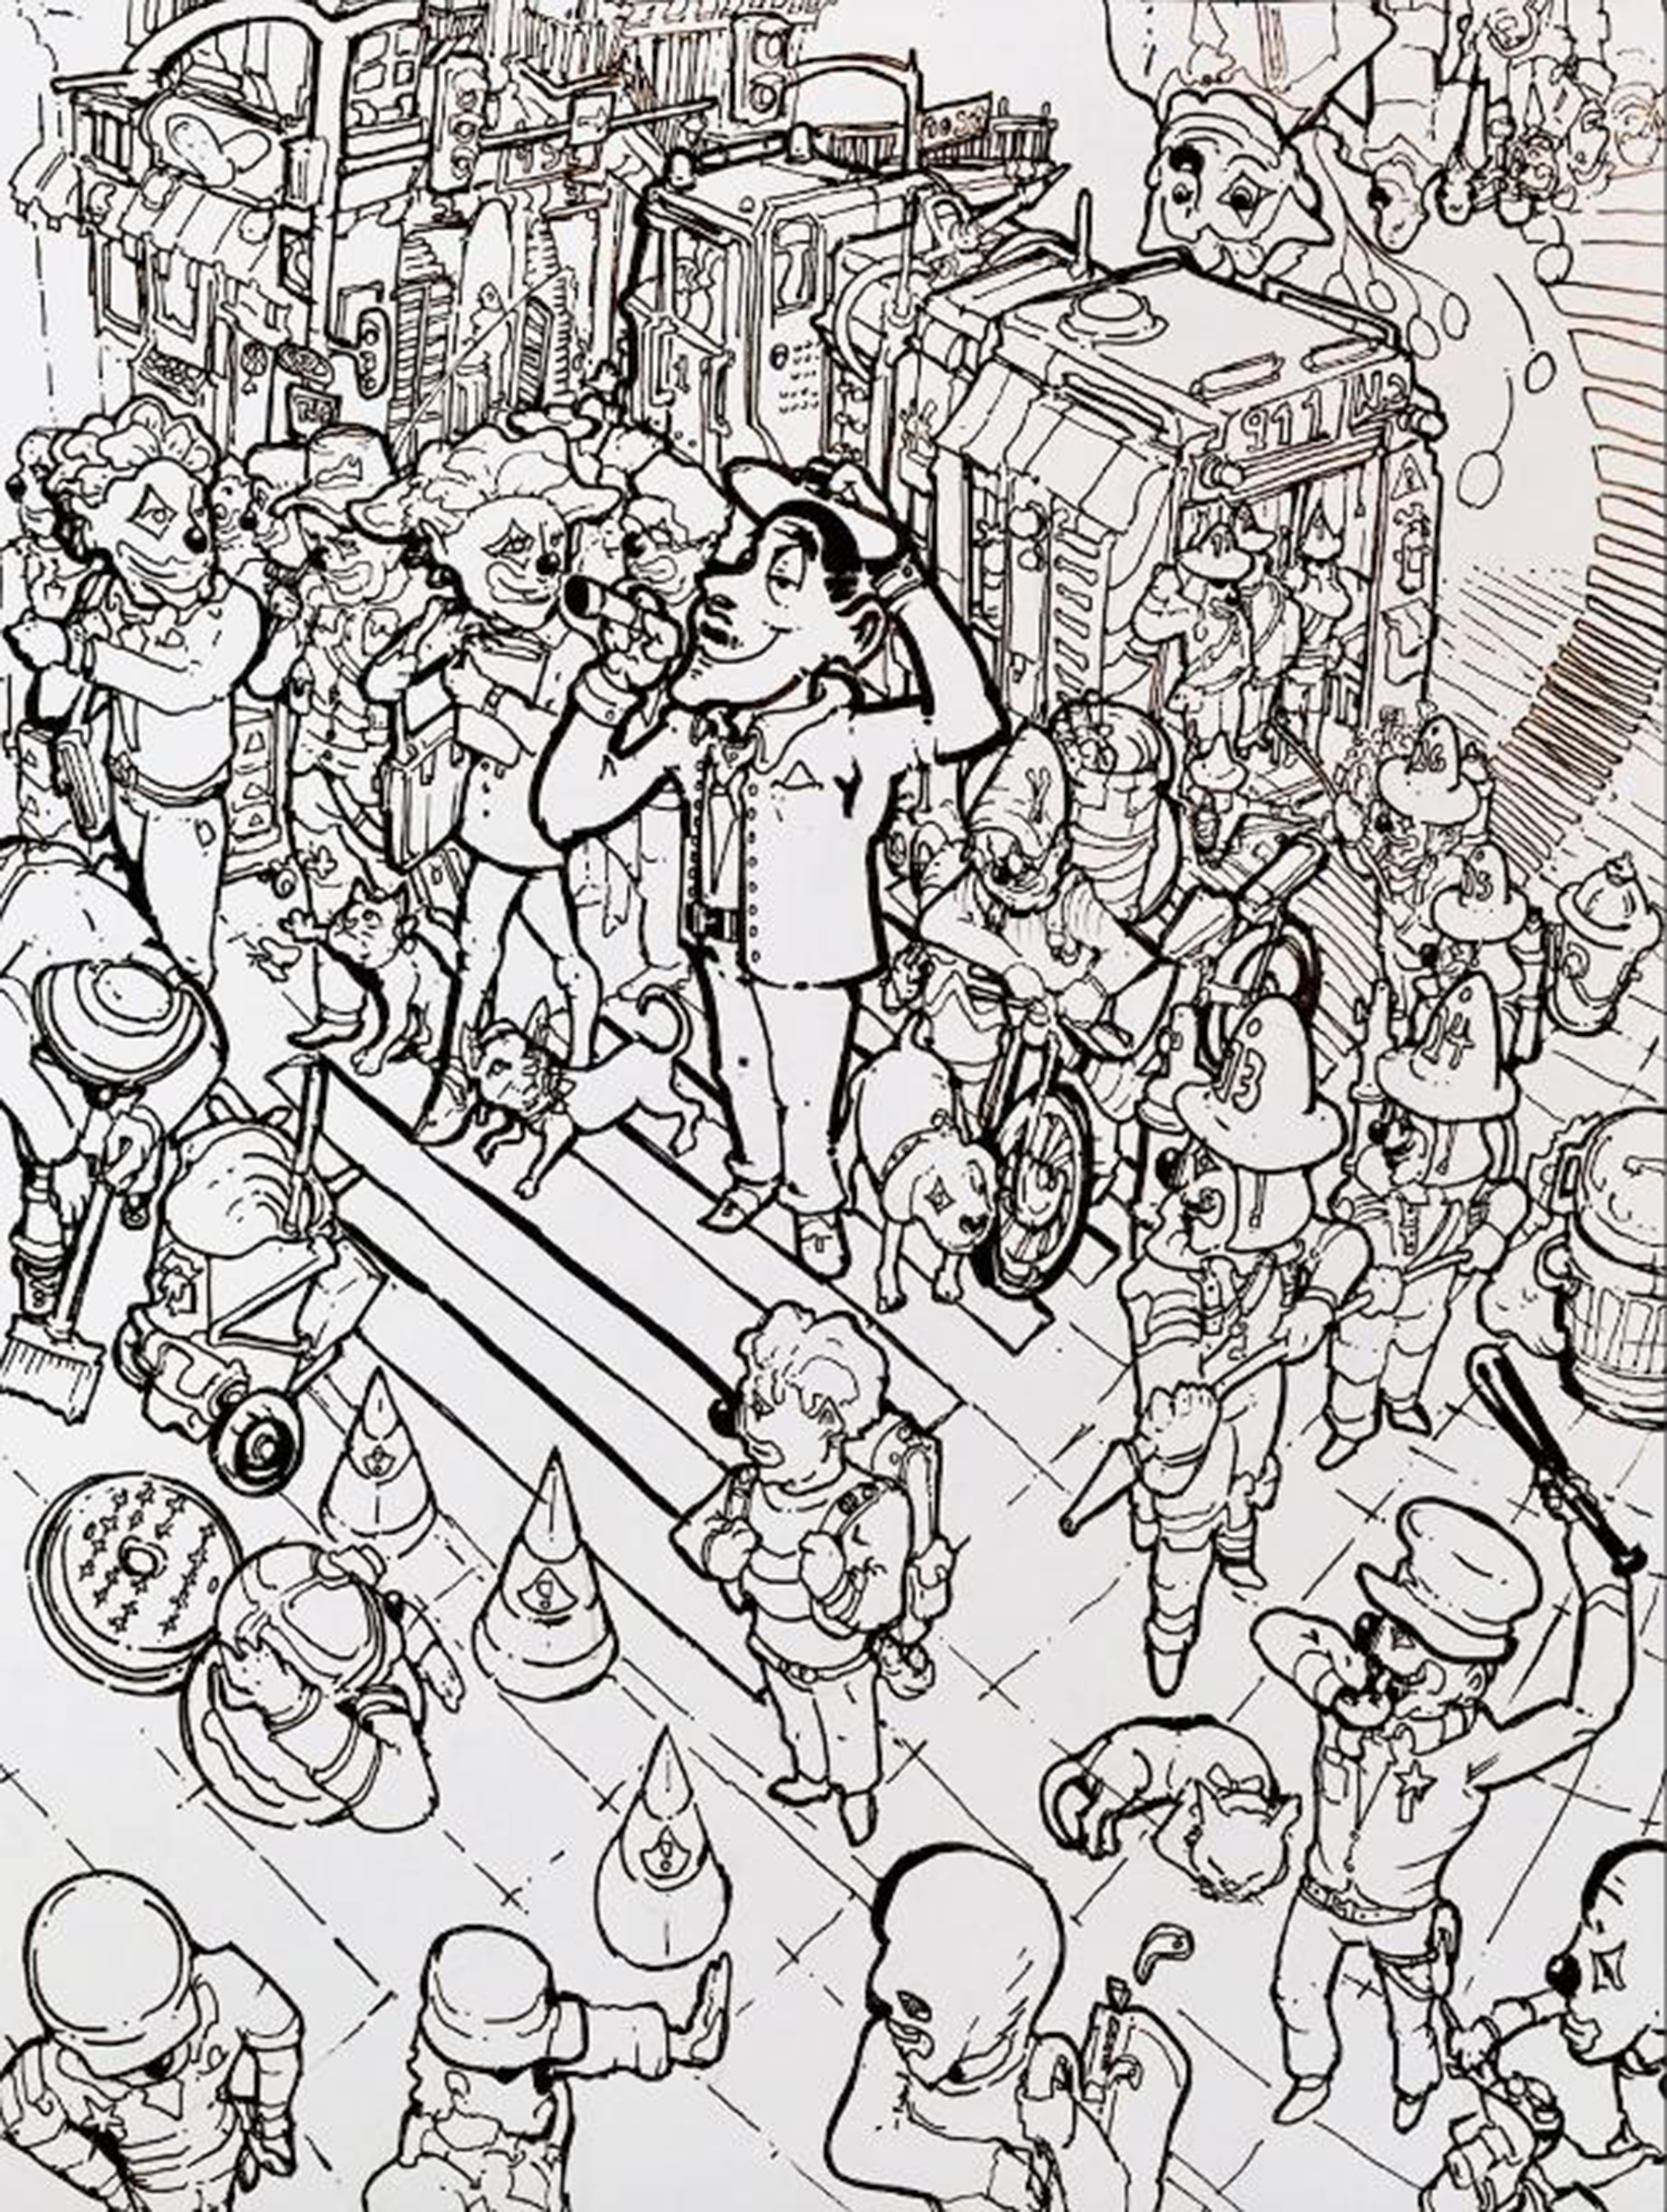 Black and white drawing of a grinning man standing in a crowd